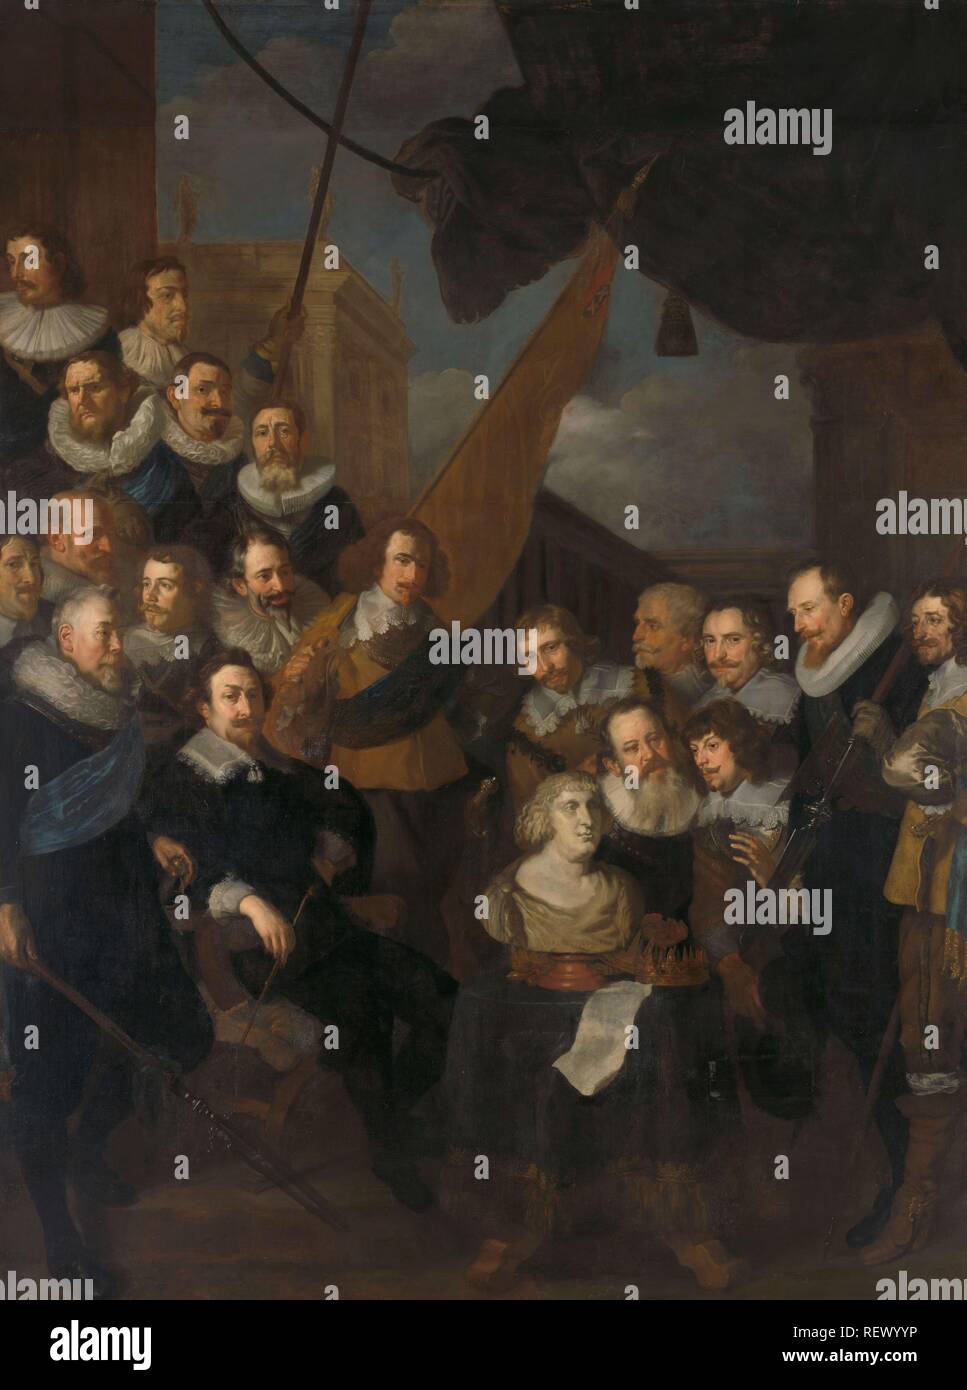 Officers and other shooters of neighborhood XIX in Amsterdam under the leadership of Captain Cornelis Bicker and Lieutenant Frederick van Banchem, ready for the reception of Maria de 'Medici, Queen Widow of France, in September 1638. Dating: 1640. Measurements: h 343 cm × w 258 cm × h 363 cm × w 277 cm × t 10 cm. Museum: Rijksmuseum, Amsterdam. Author: Joachim von Sandrart. Stock Photo